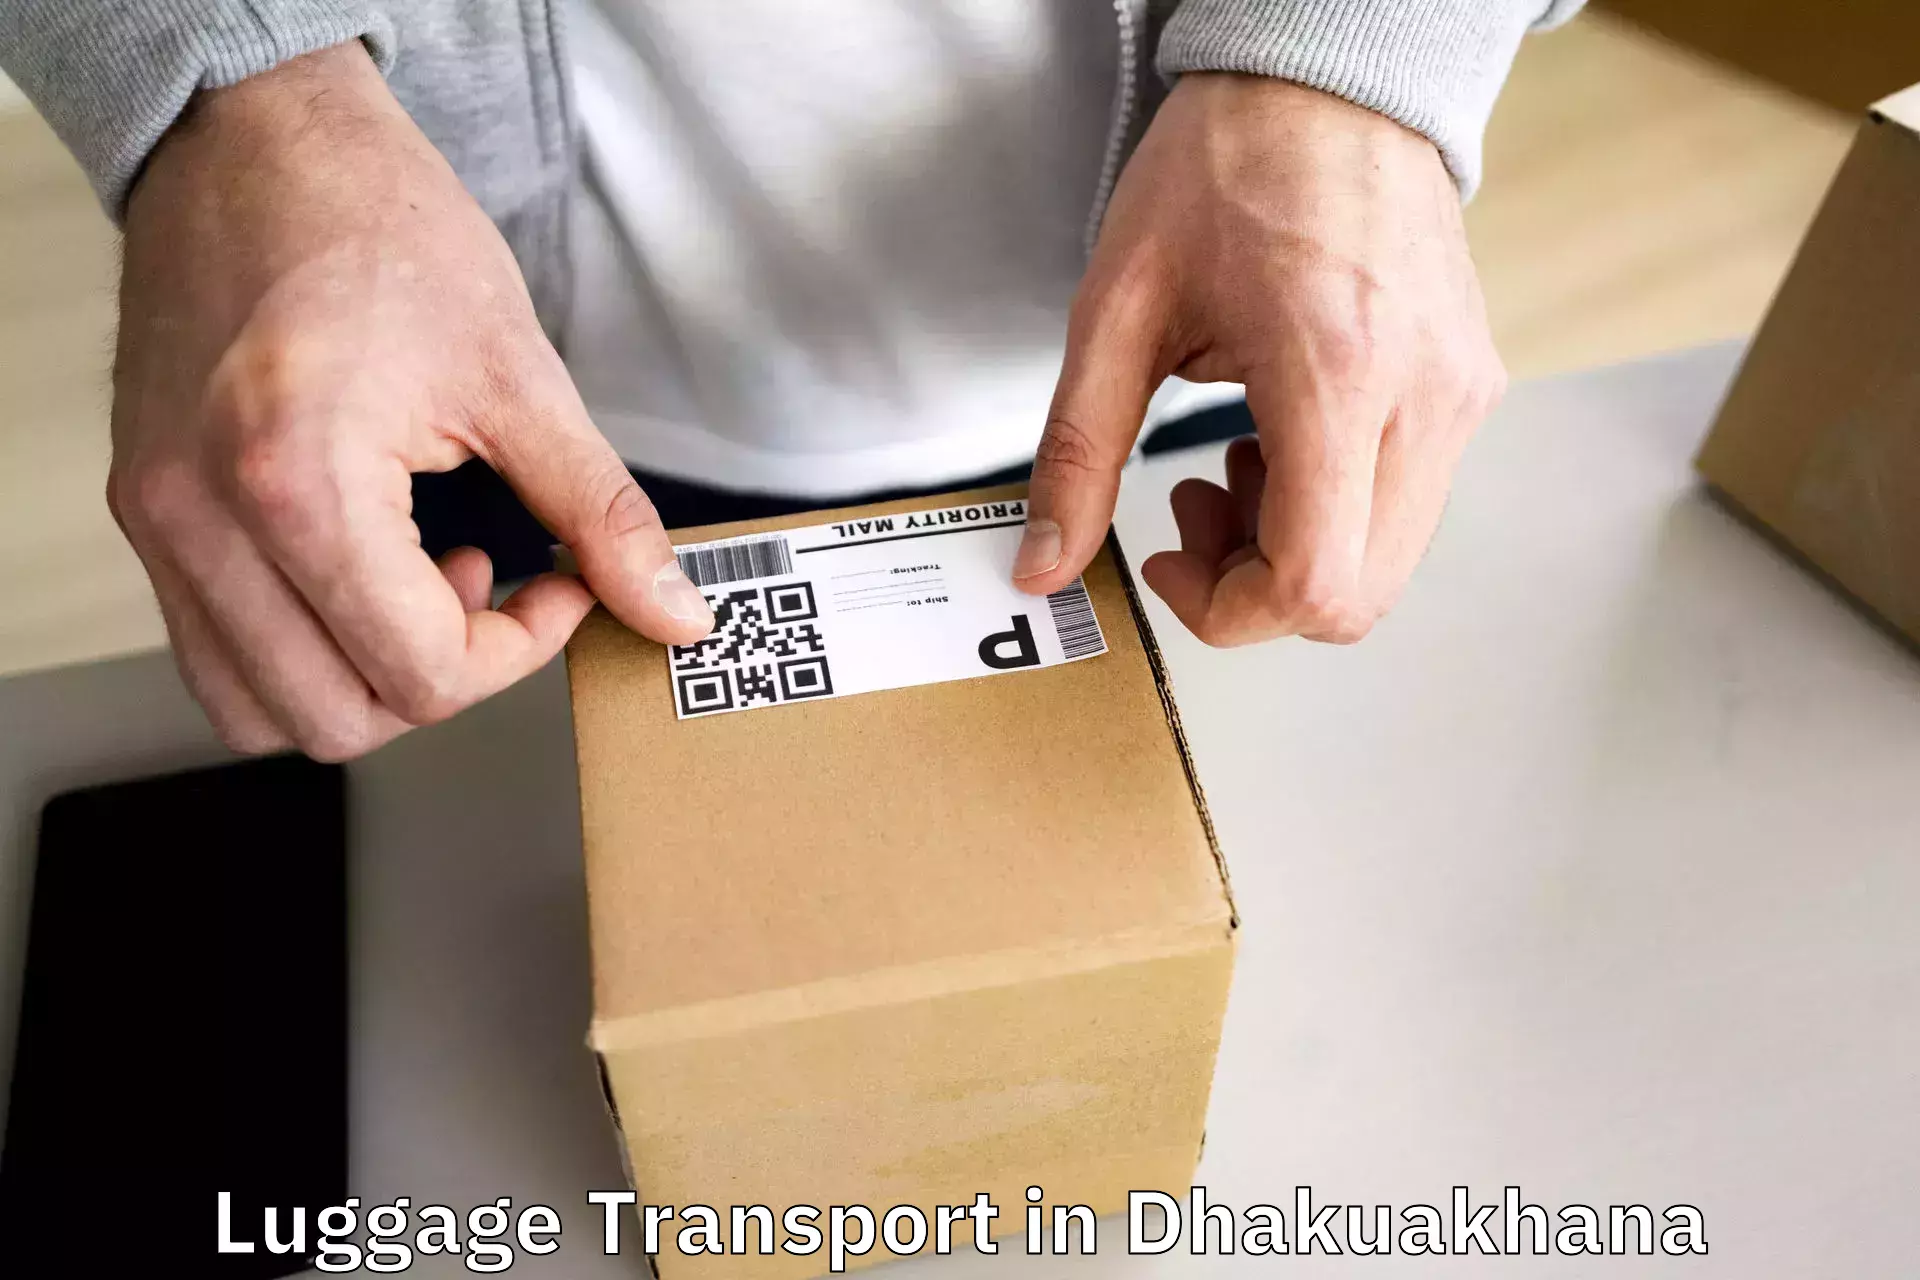 Luggage transport pricing in Dhakuakhana